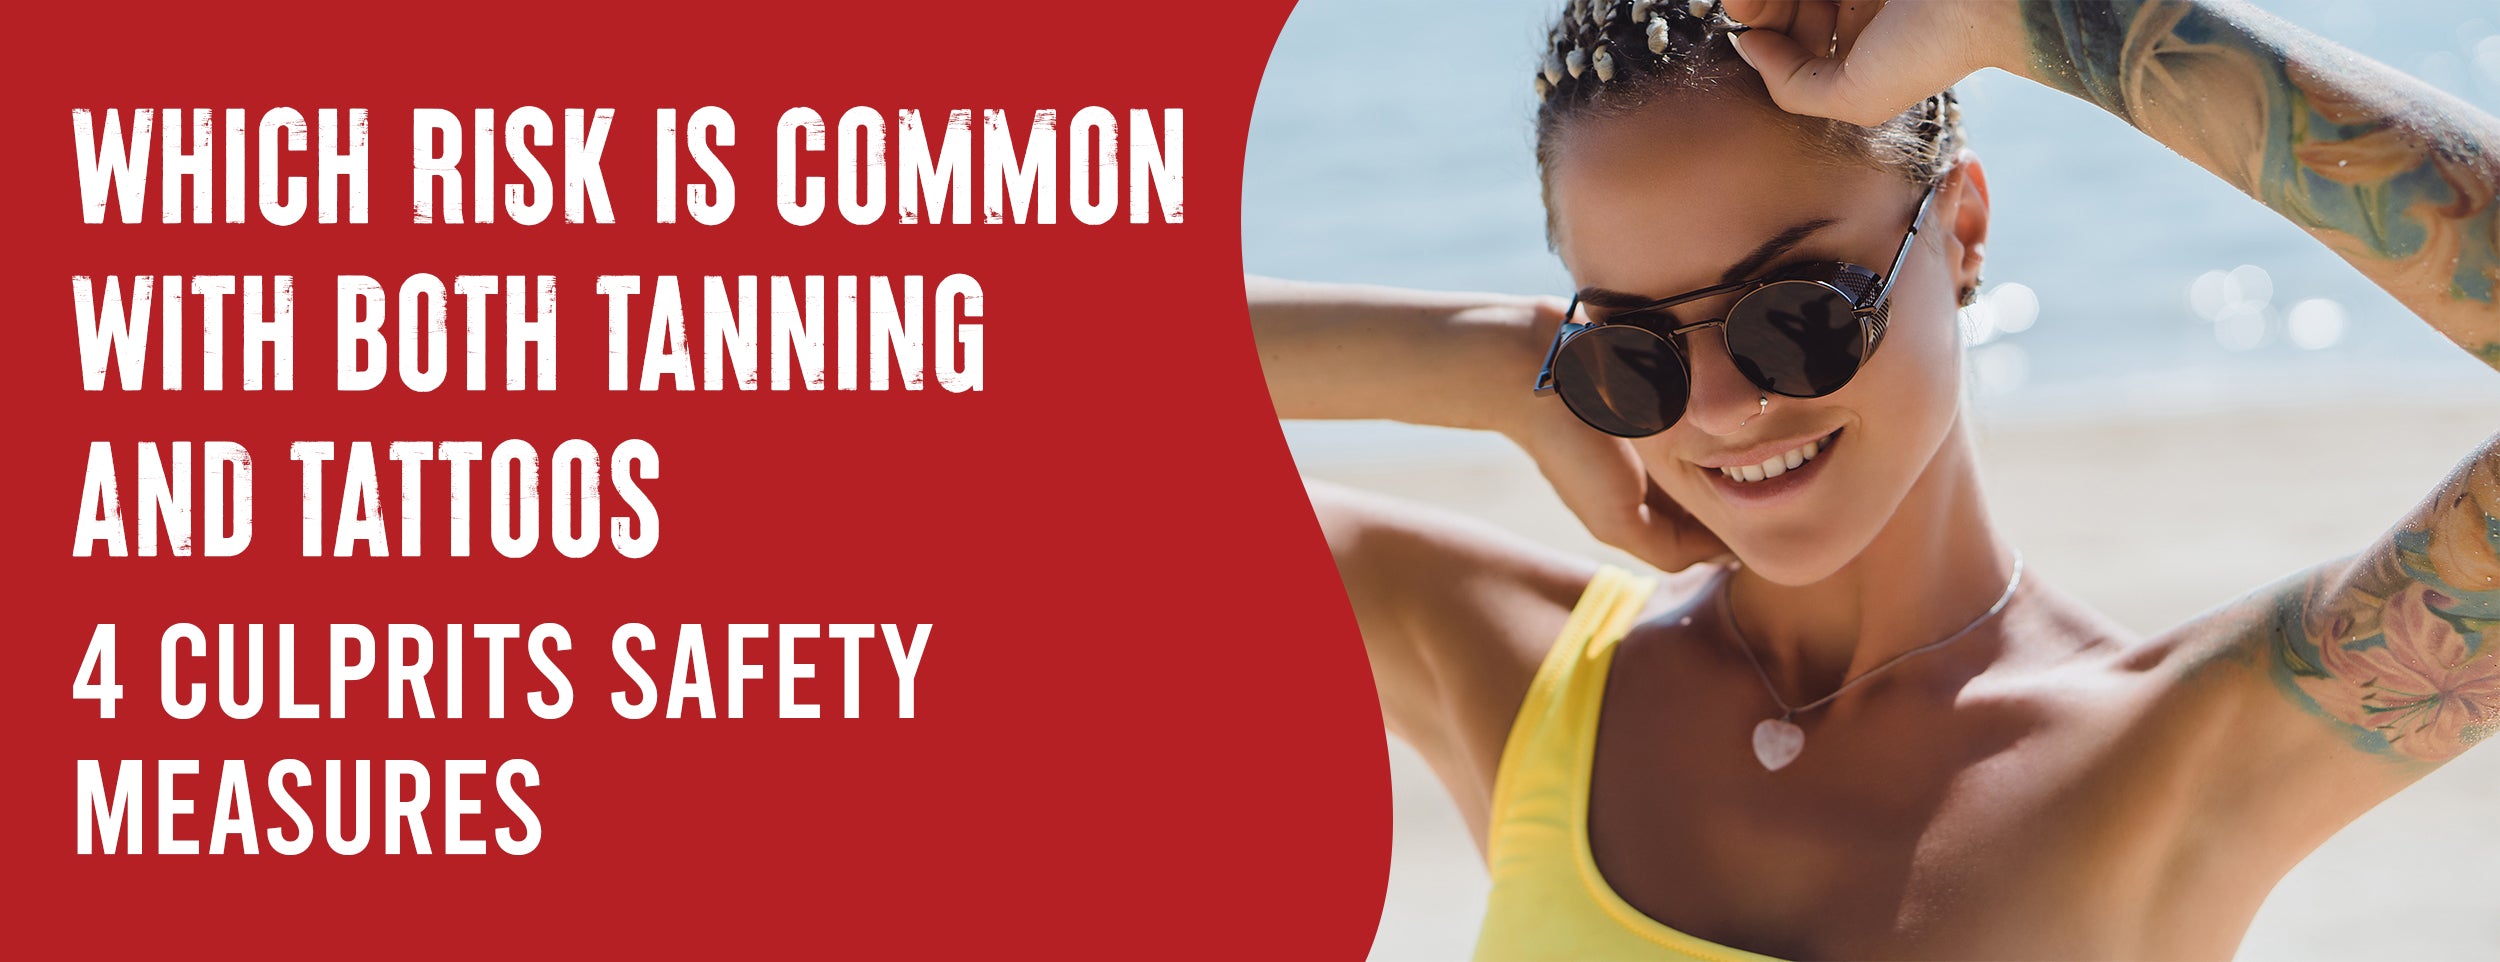 4 Risks Associated With Tanning and Tattoos: 4 Culprits and Safety Measures